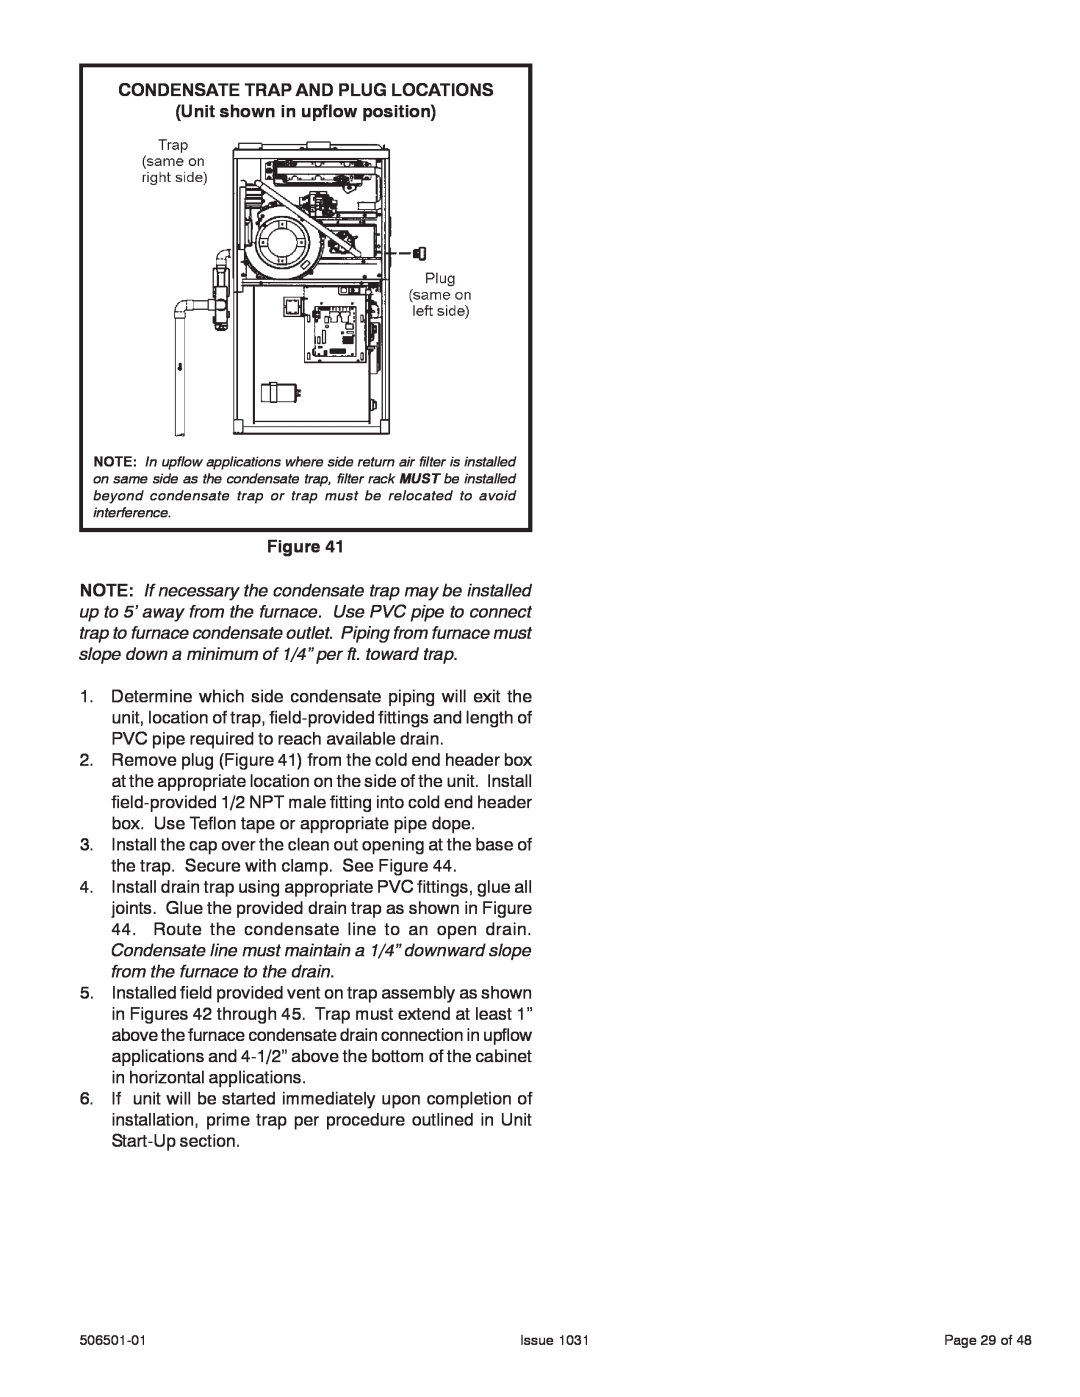 Allied Air Enterprises 95G1UH, A95UH Condensate Trap And Plug Locations, Unit shown in upflow position, Issue, Page 29 of 